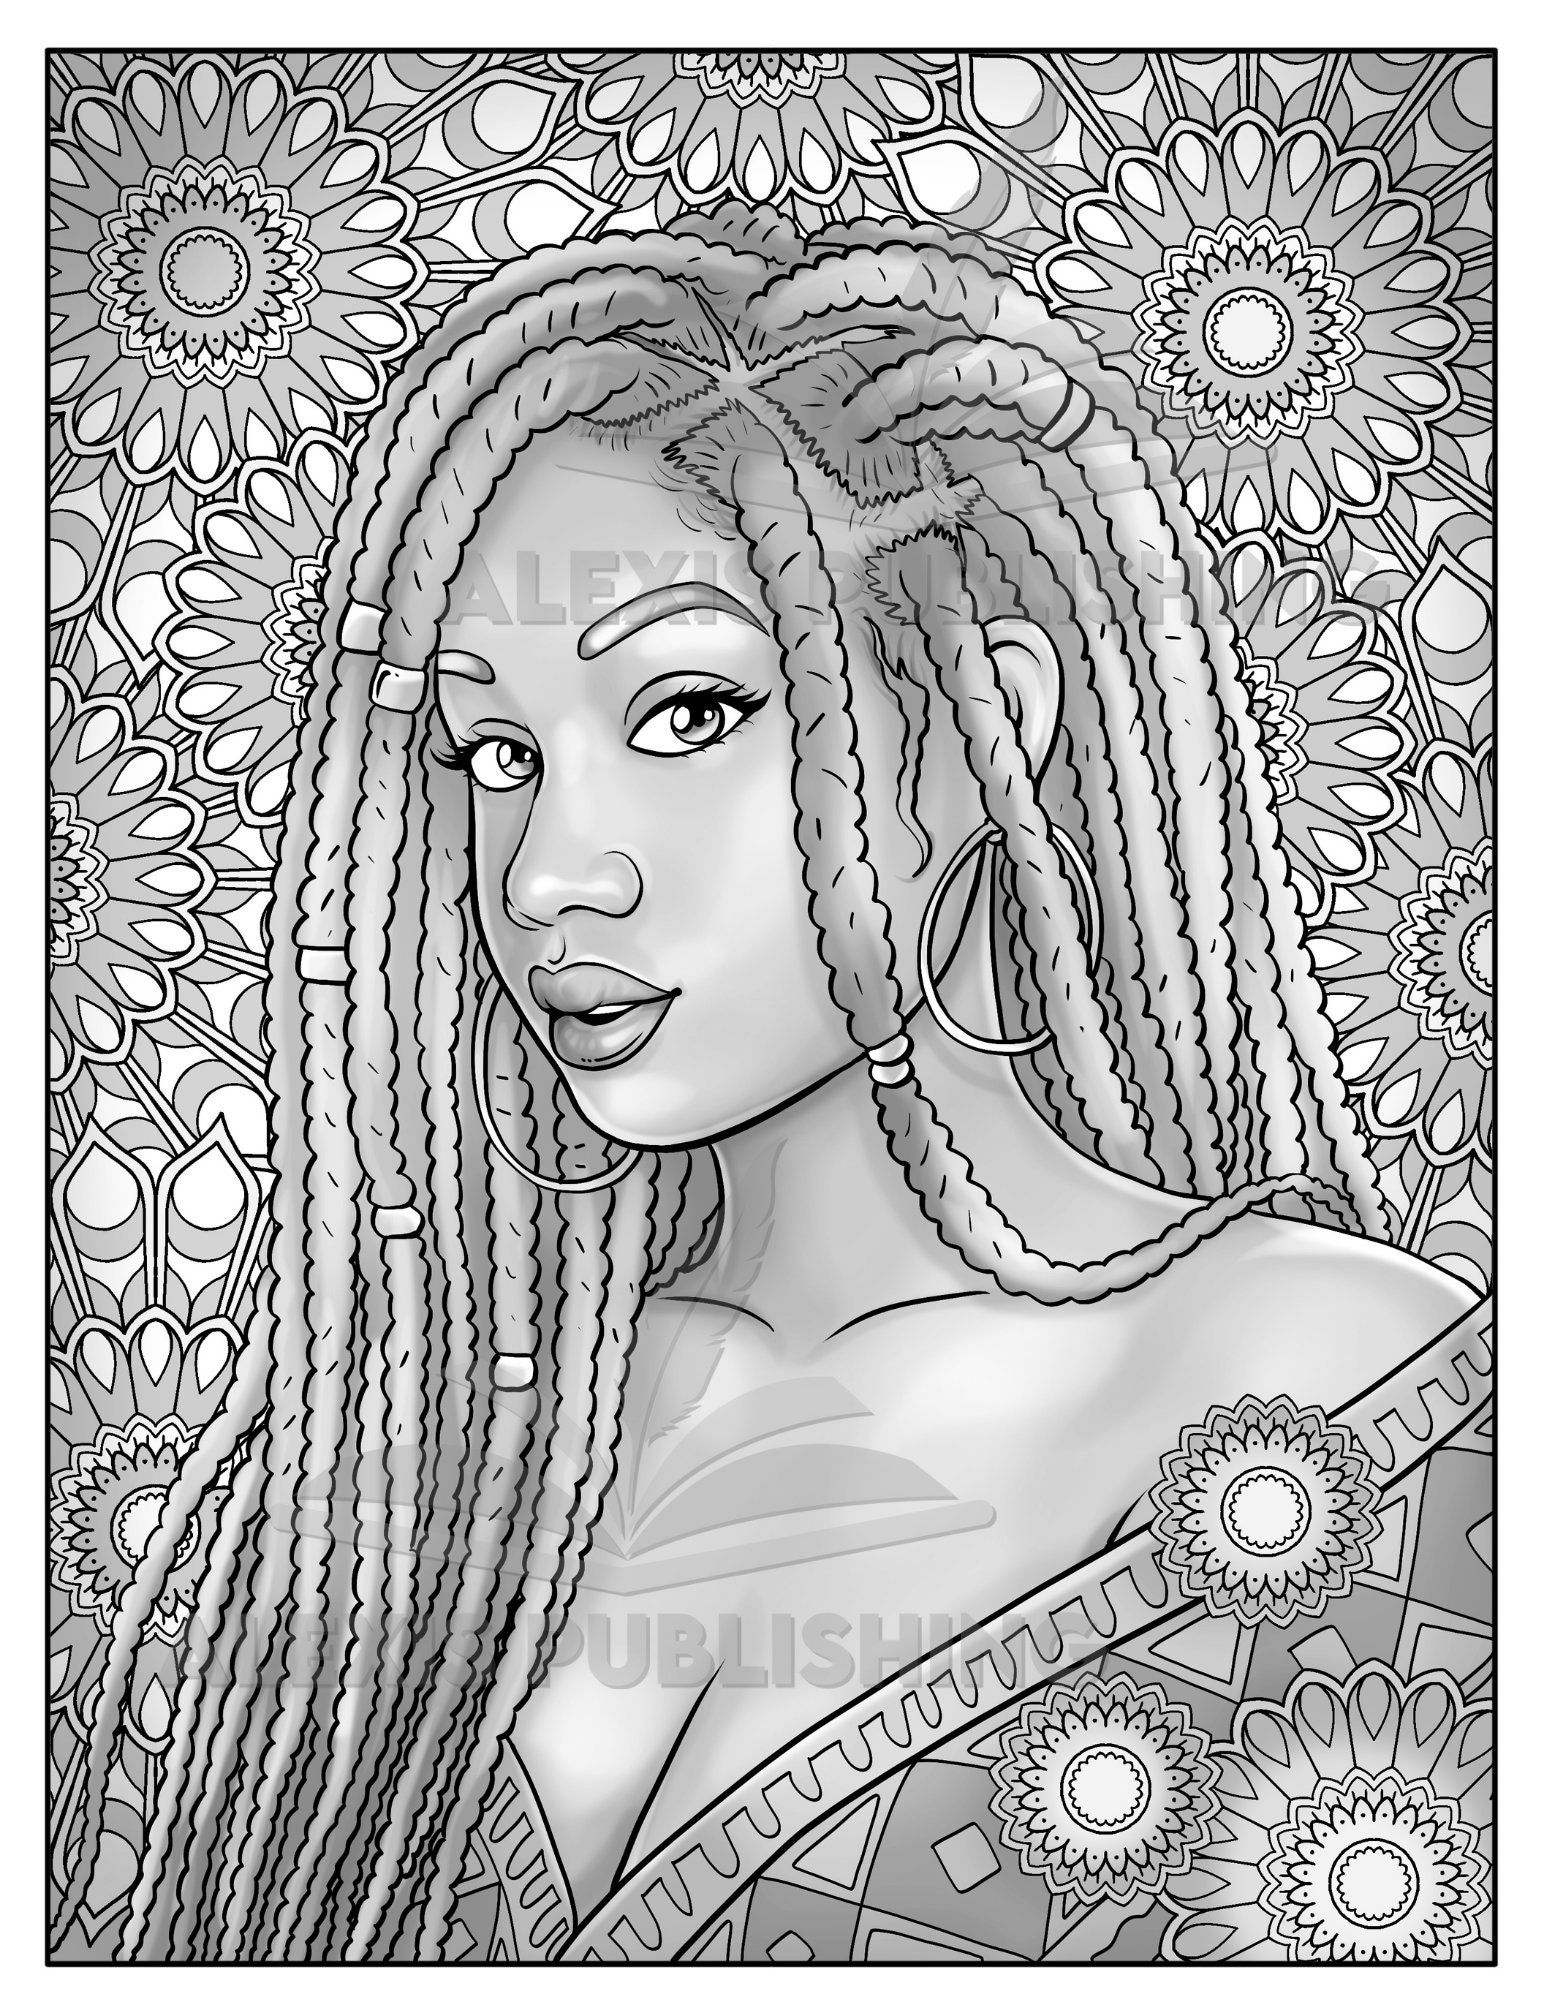 10 Black Woman Coloring Pages, African American Coloring Pages, Adult  Grayscale Coloring Pages Instant Download Series 1 